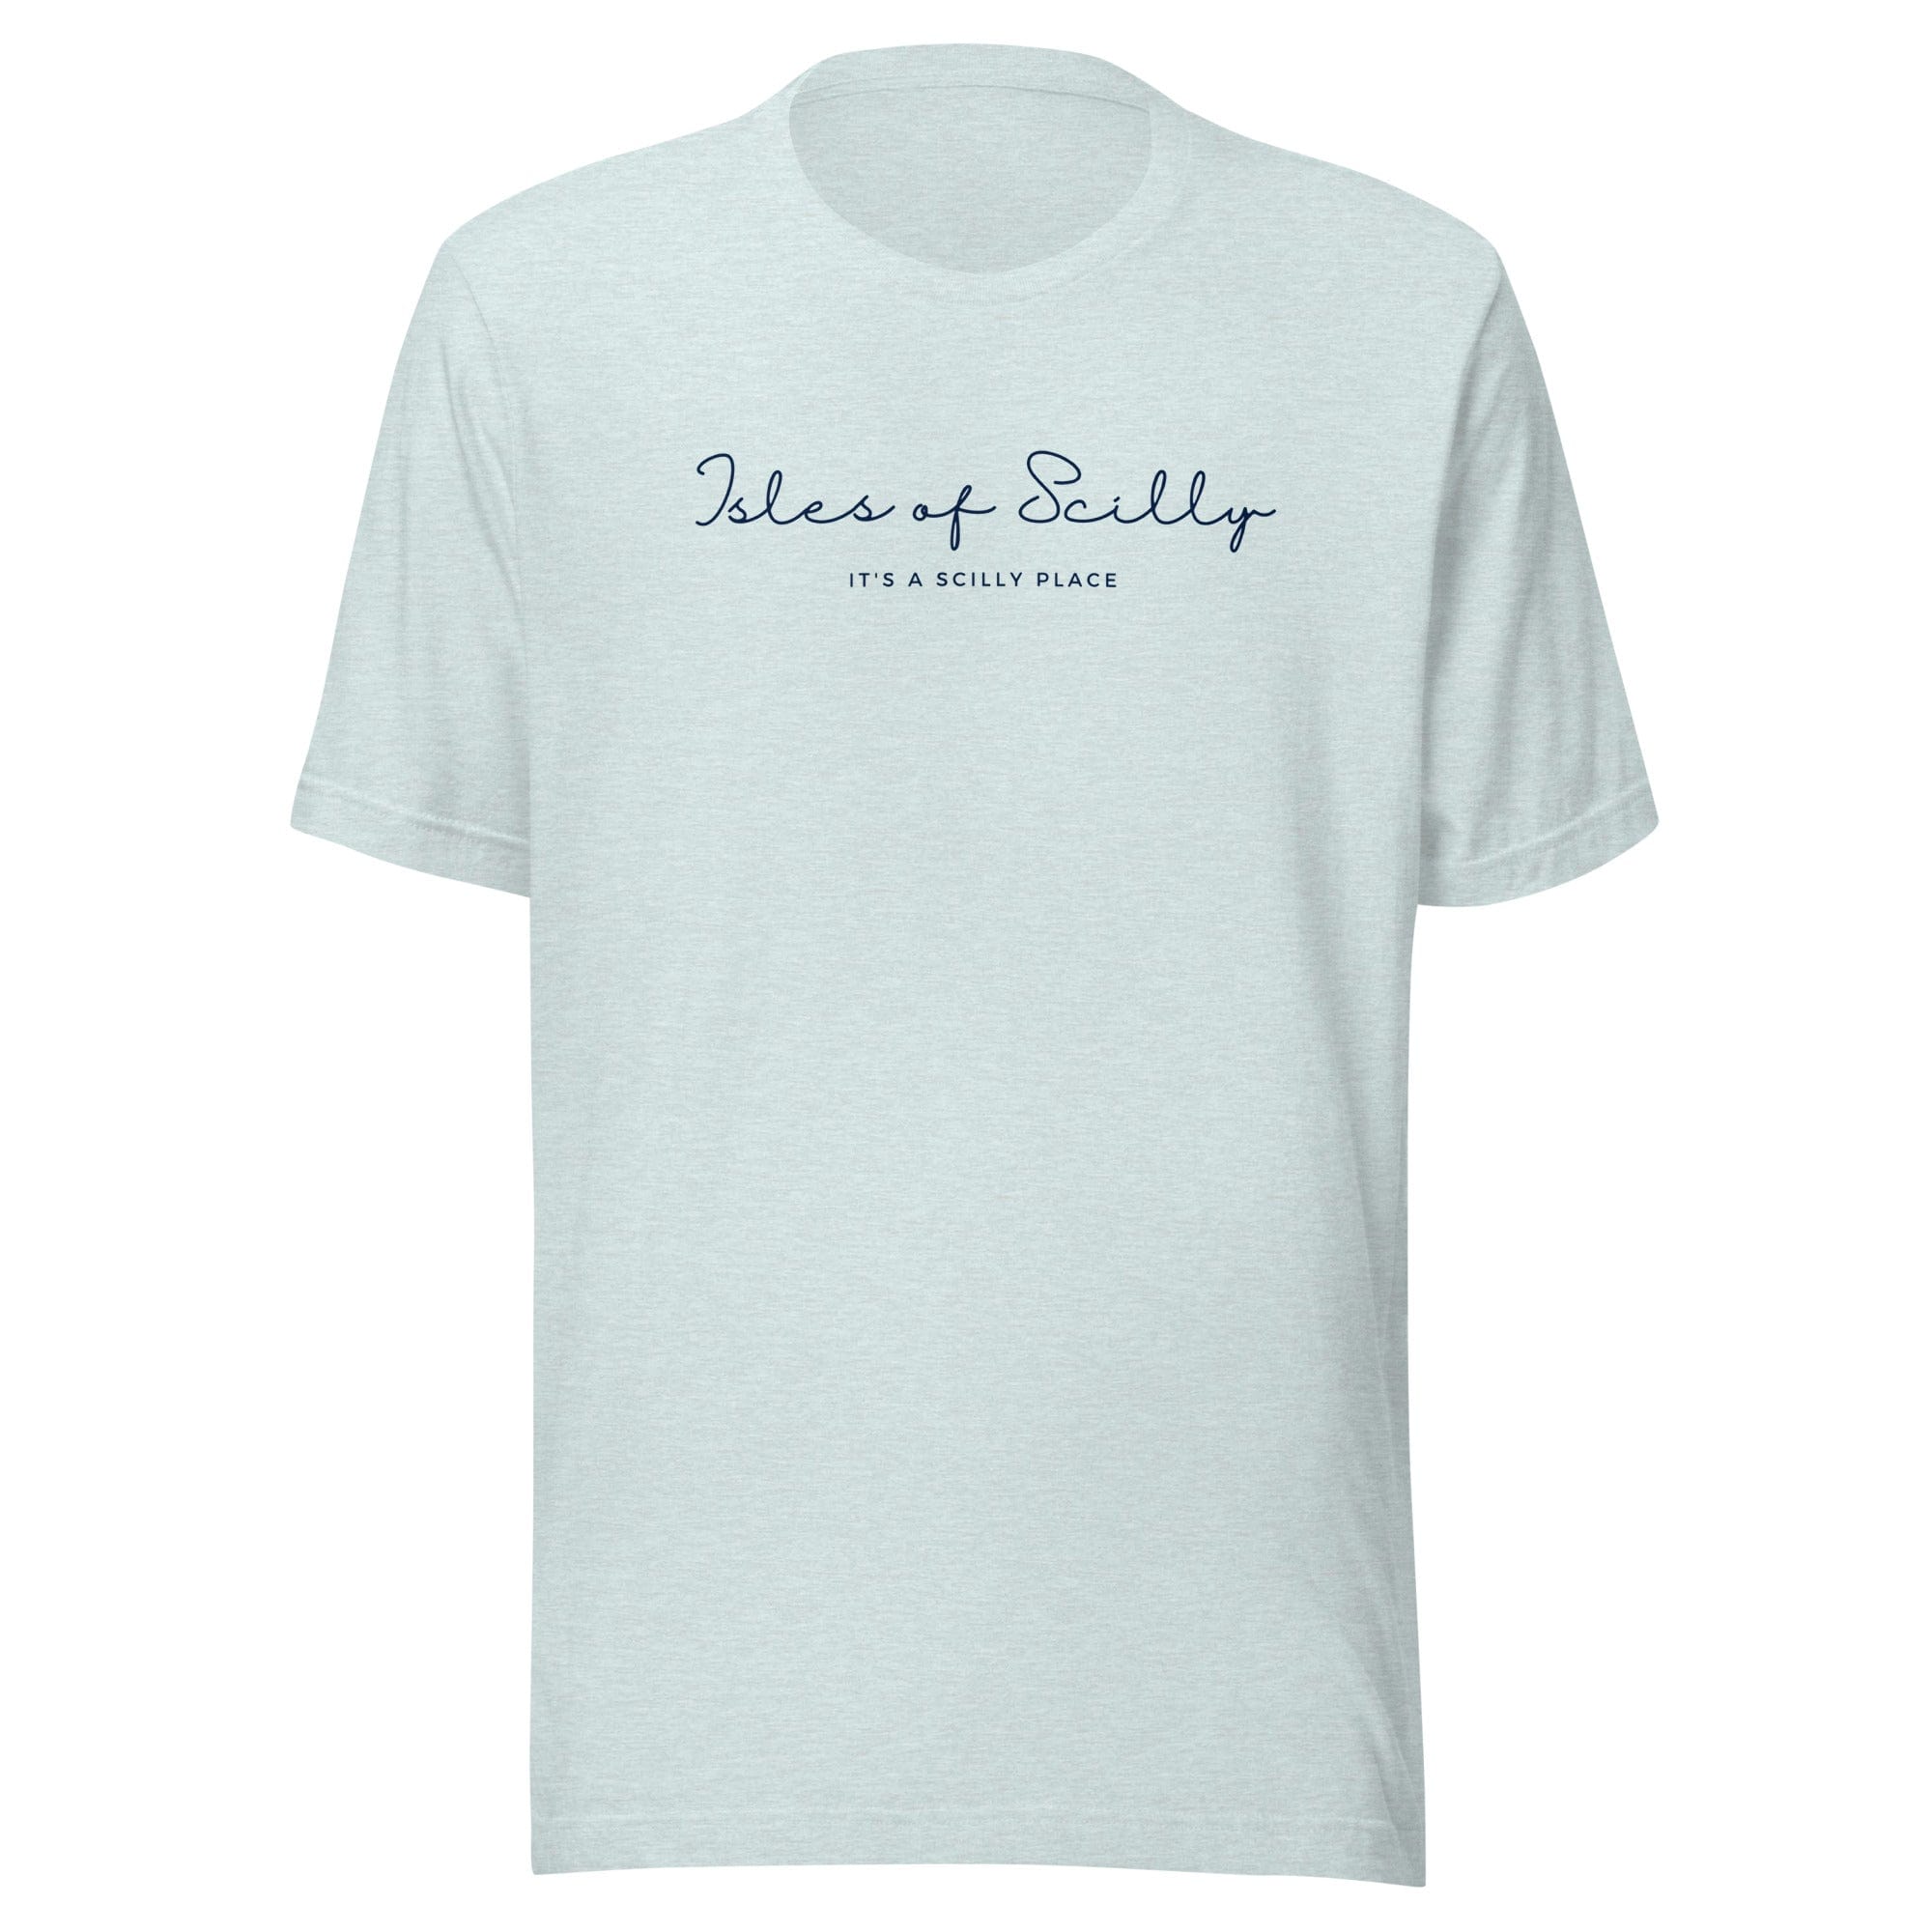 Isles of Scilly, It's a Scilly Place T-shirt Heather Prism Ice Blue / S Shirts & Tops Jolly & Goode